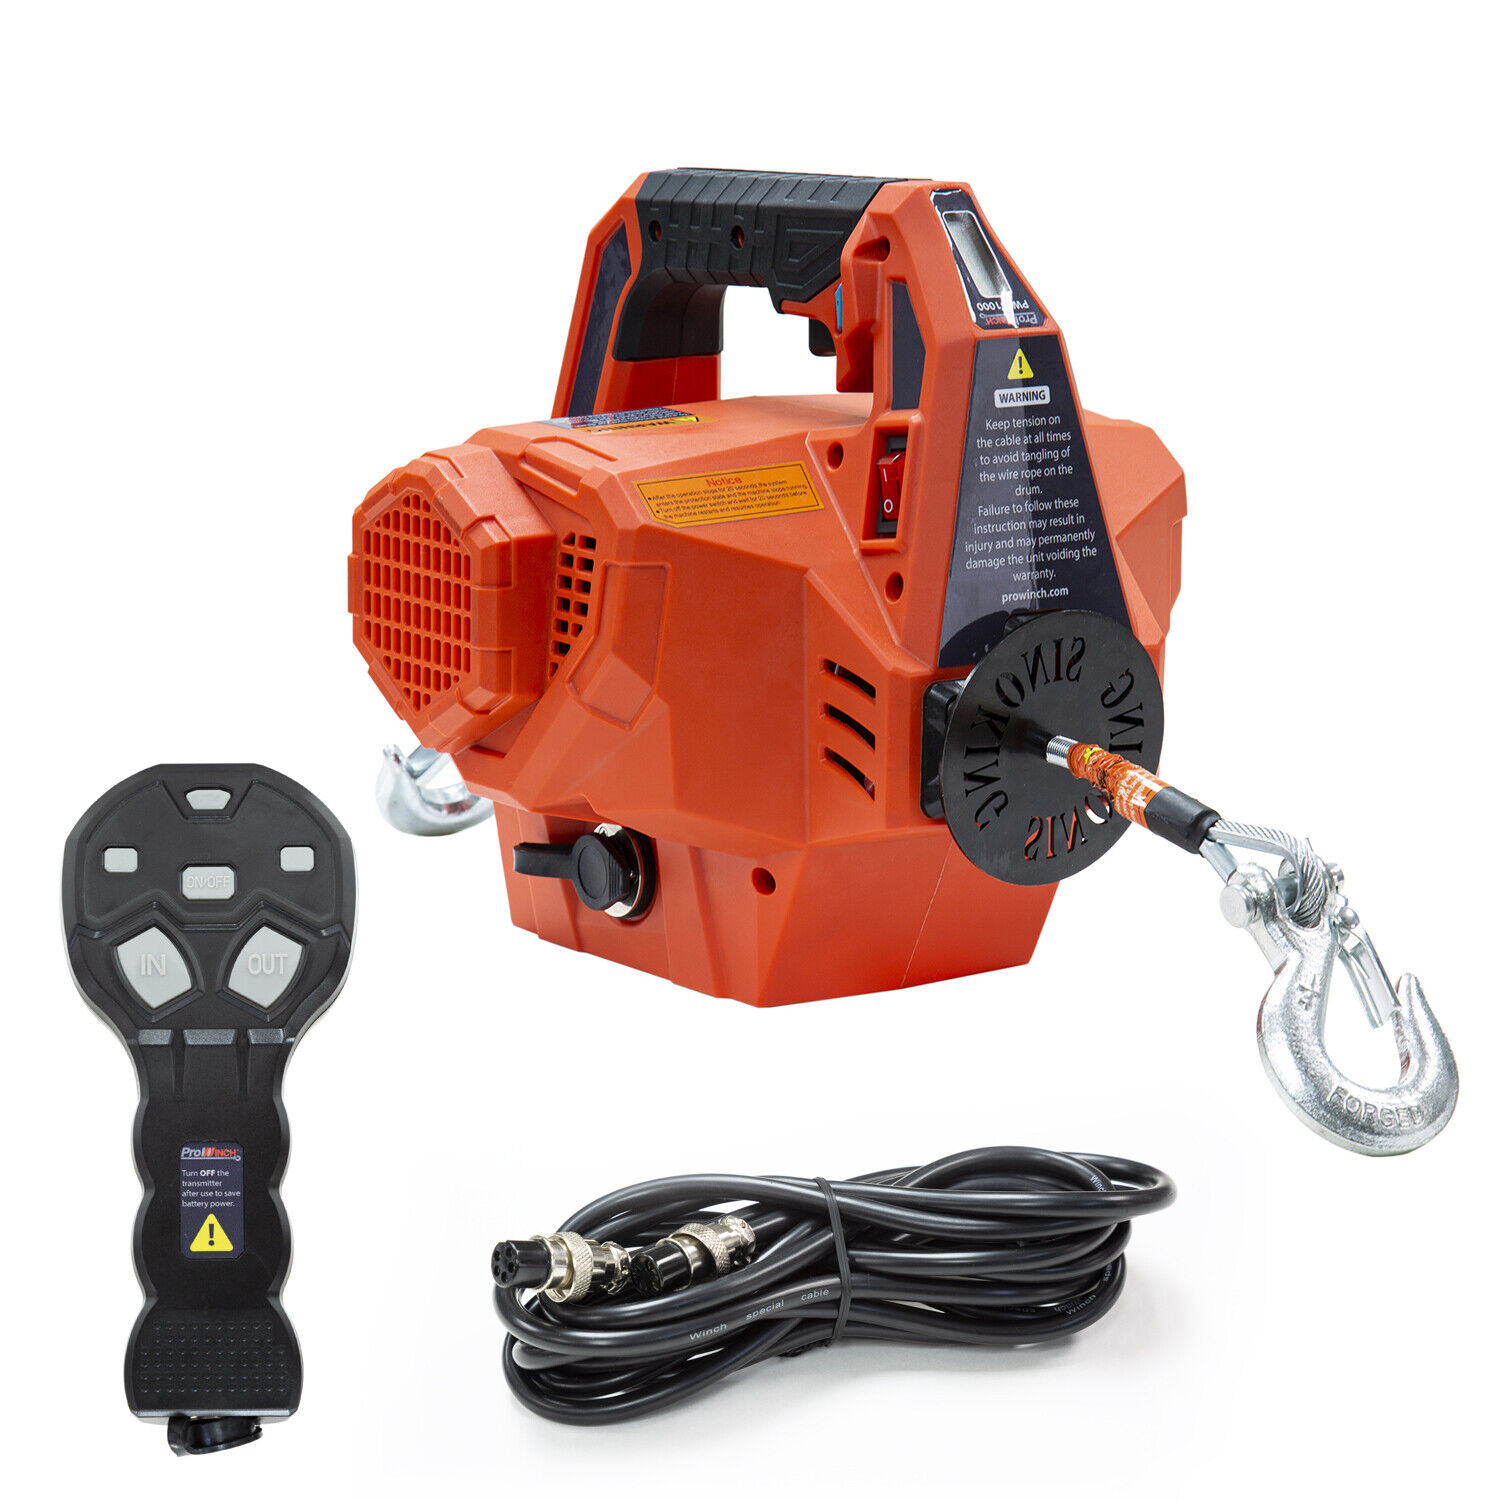 Prowinch Portable Electric Winch Hoist 500 lbs. Rechargeable Battery Powered Wir